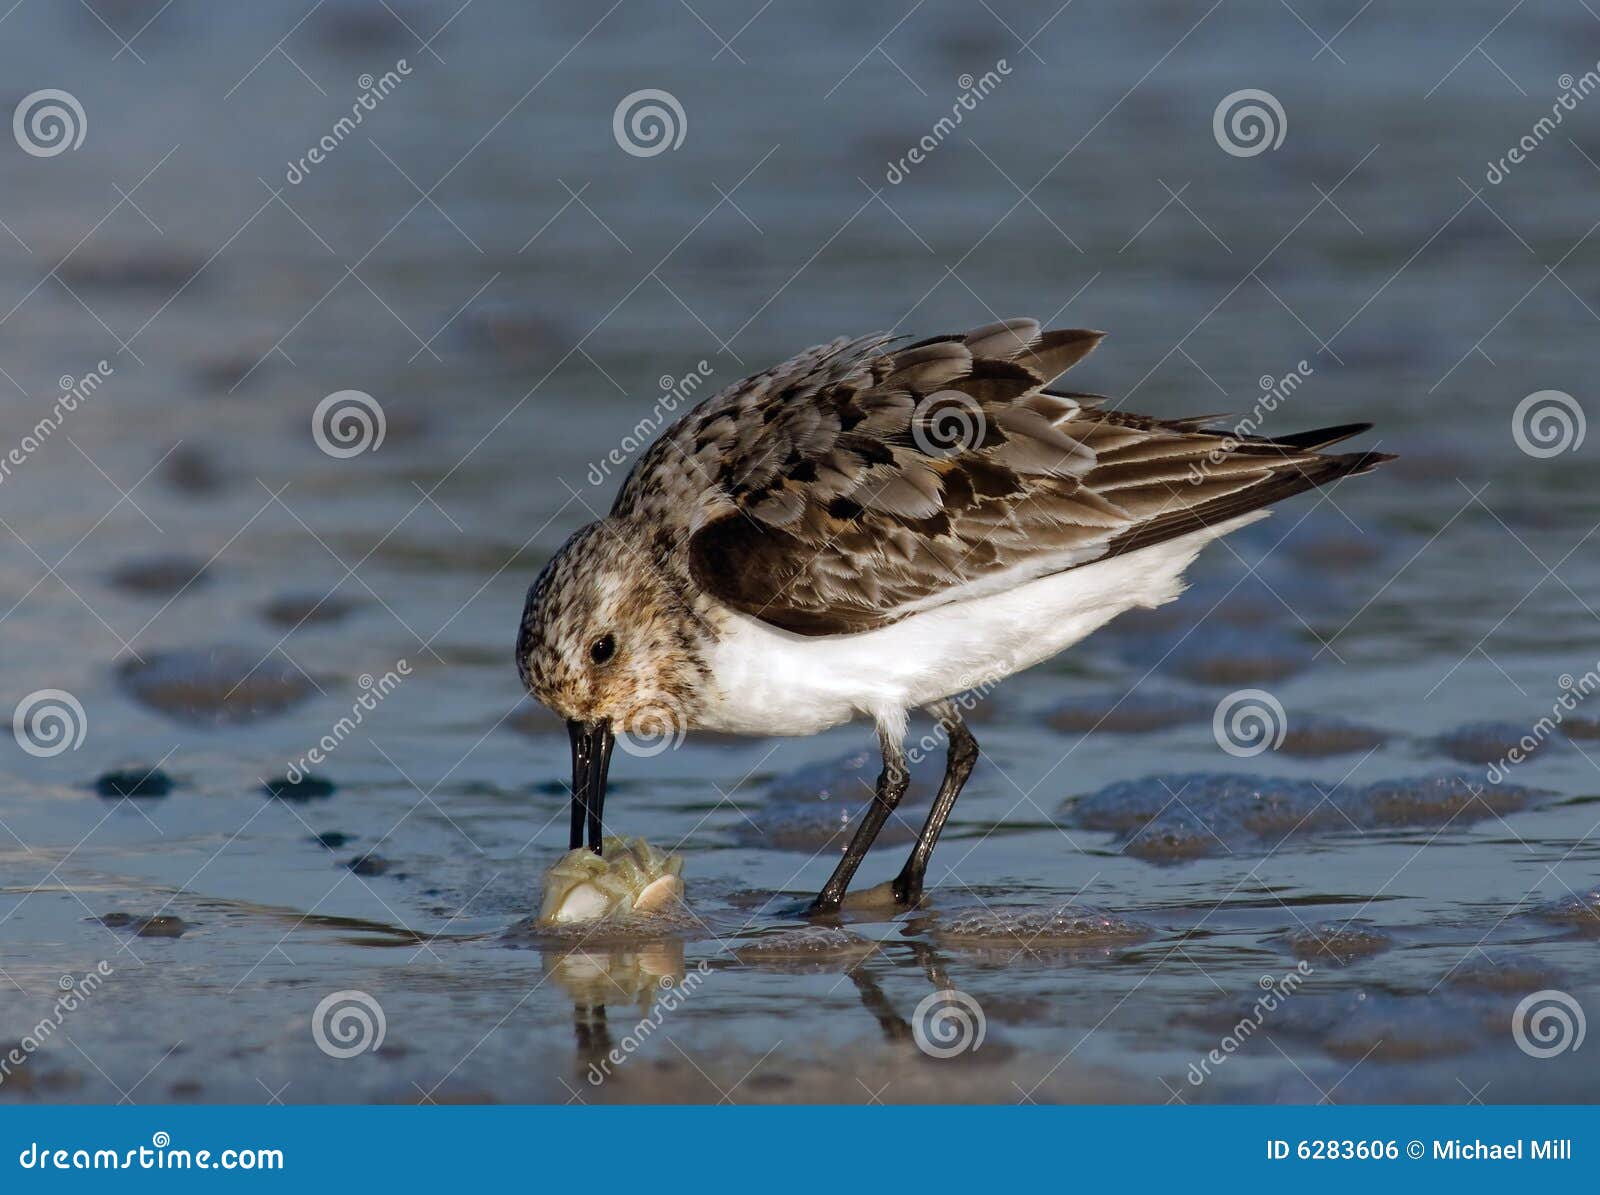 semipalmated sandpiper with sand crab